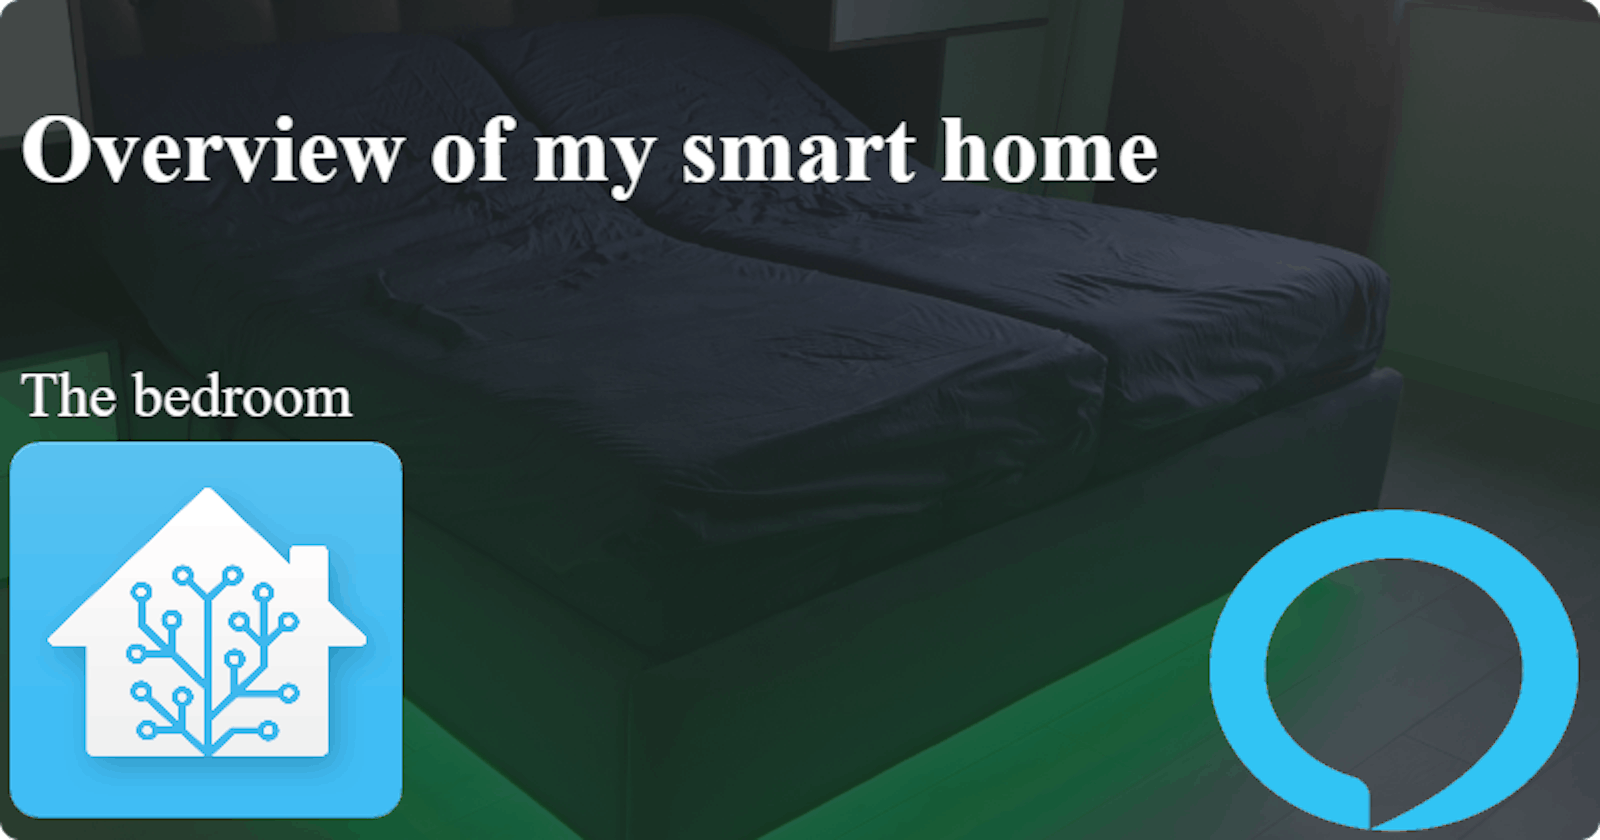 Overview of my smart home: The bedroom